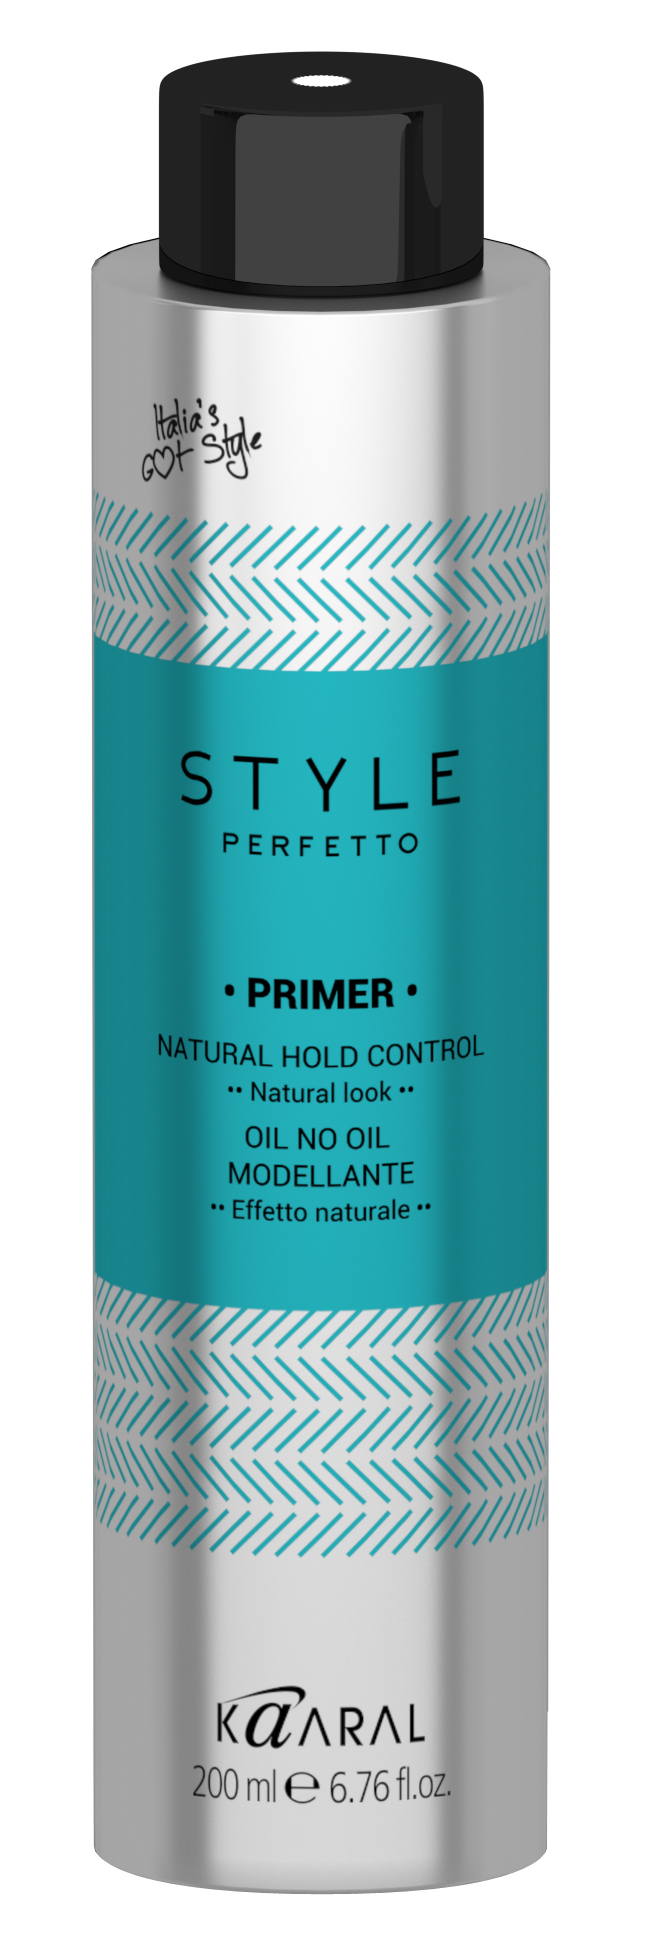 Style  Perfetto Моделирующее сухое масло, 200 мл PRIMER NATURAL HOLD CONTROL.